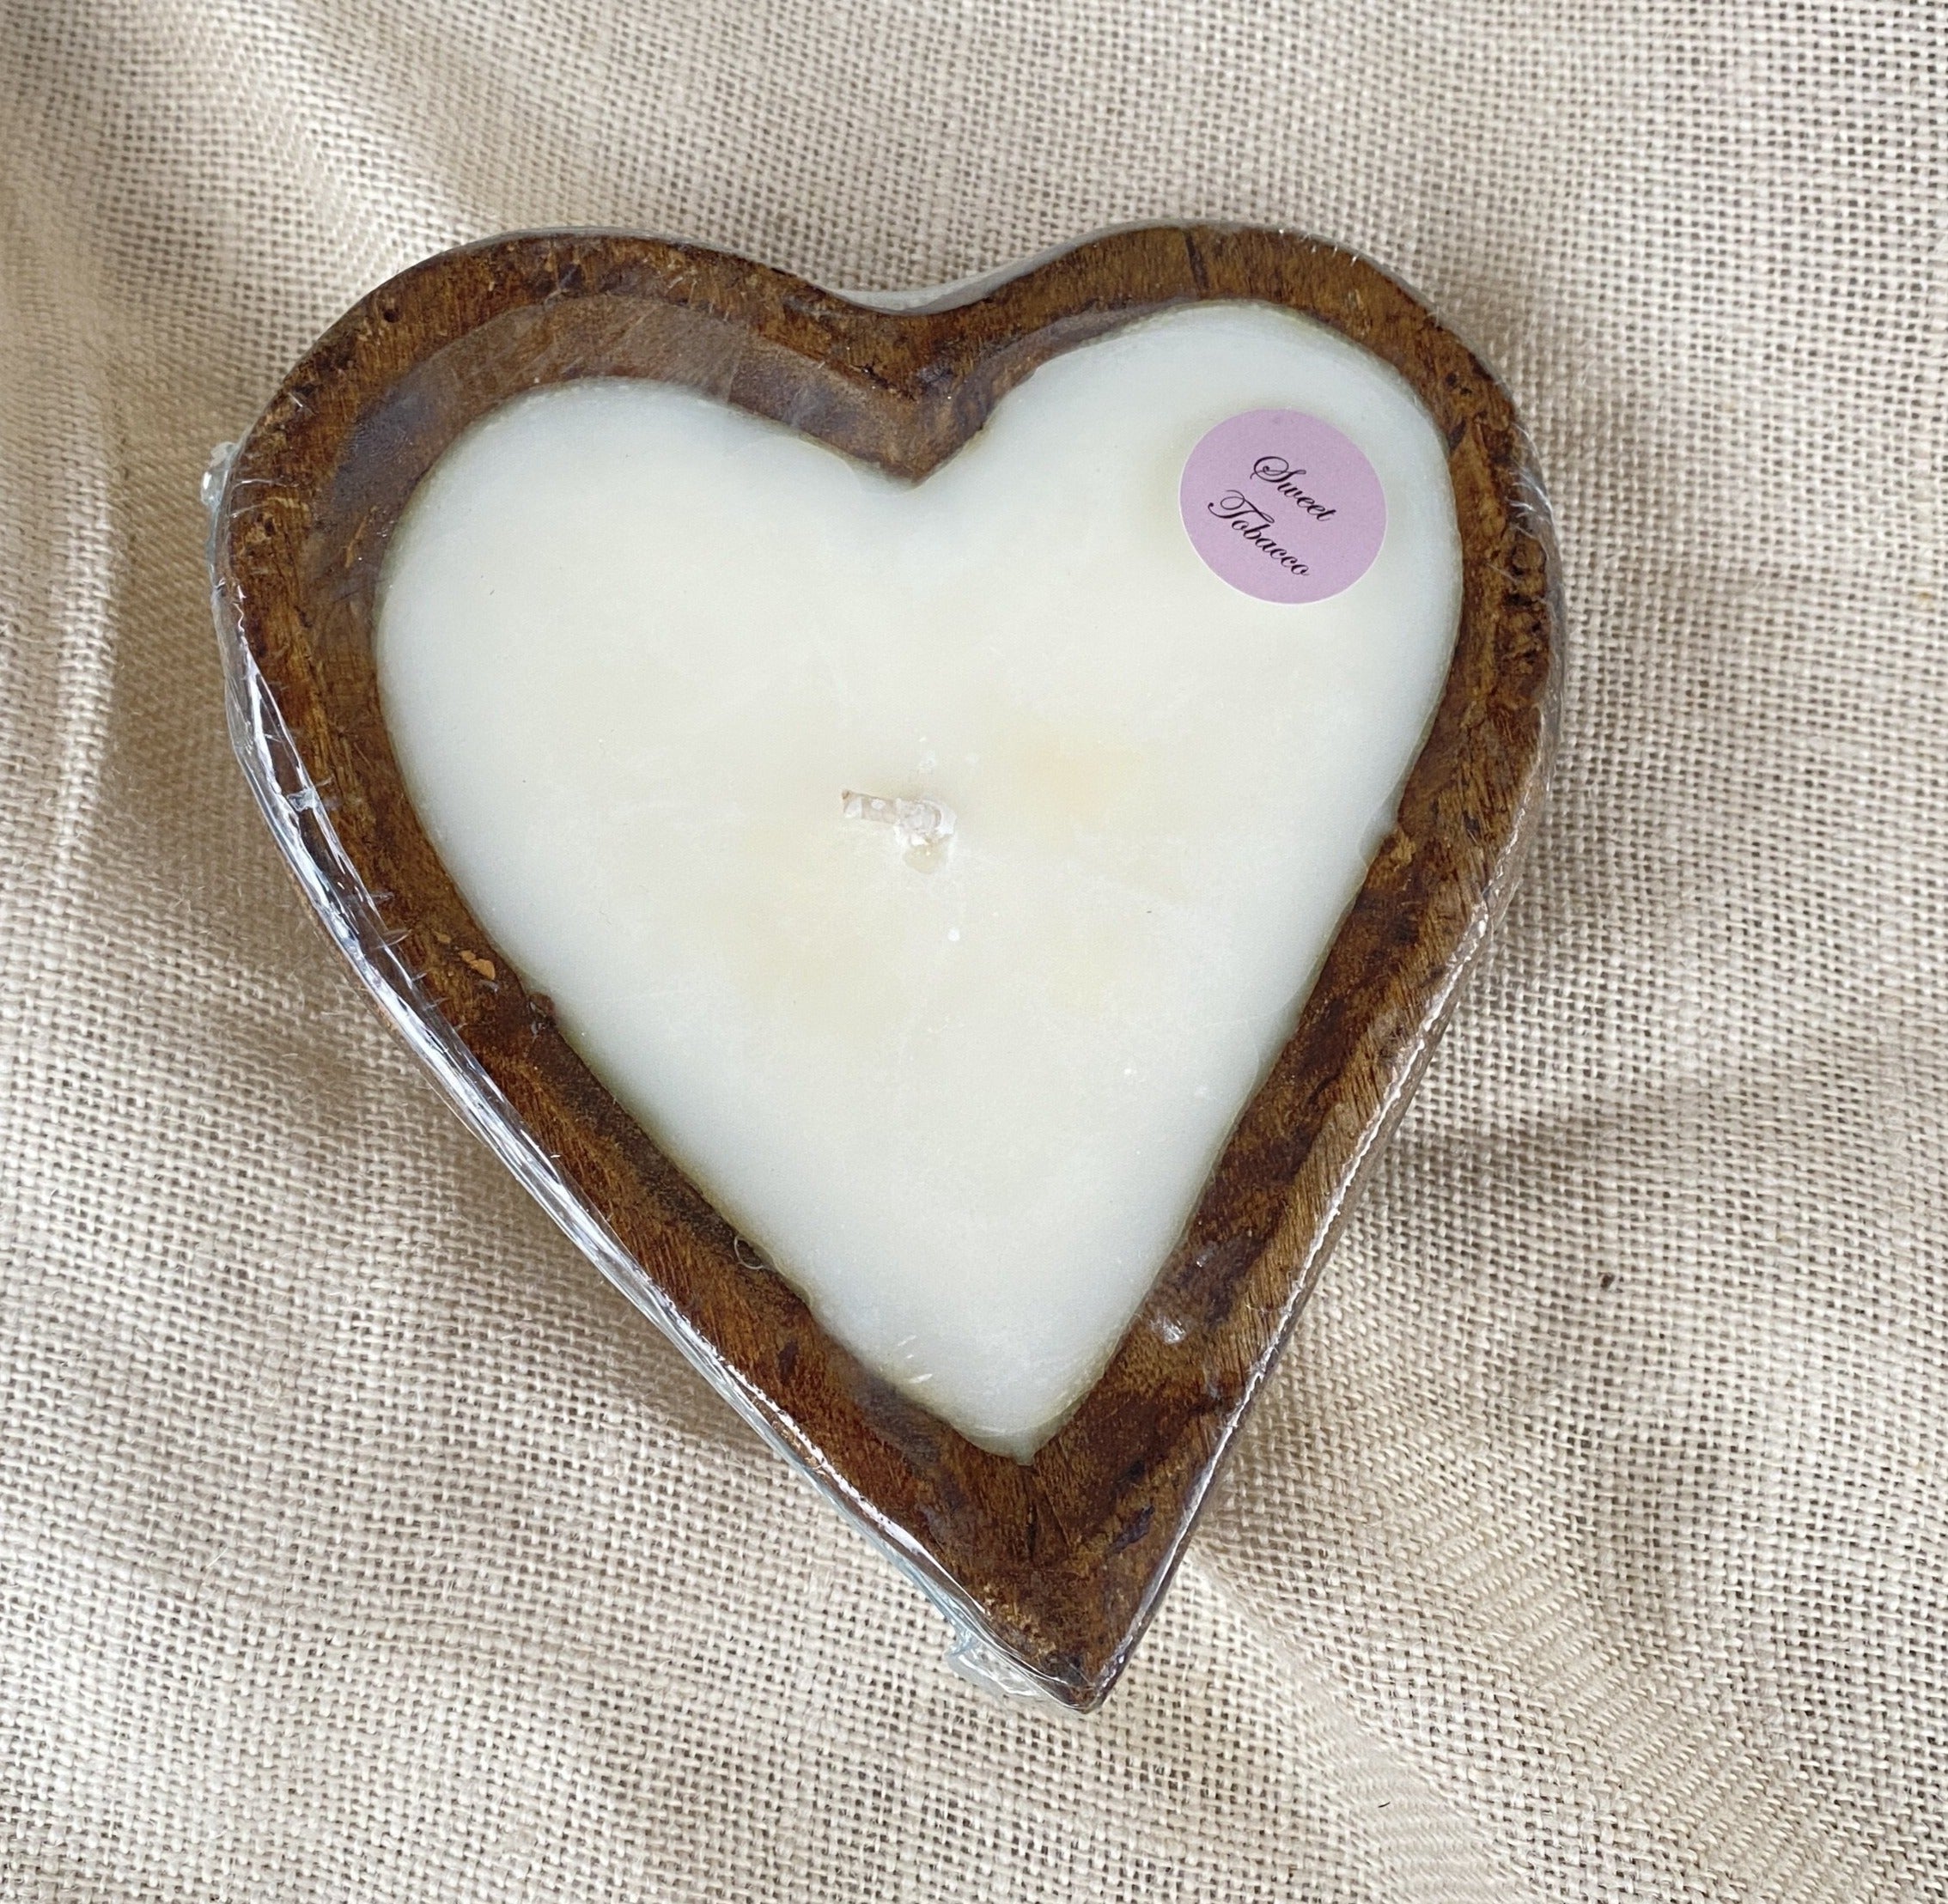 Candle Filled Heart Shaped Dough Bowl